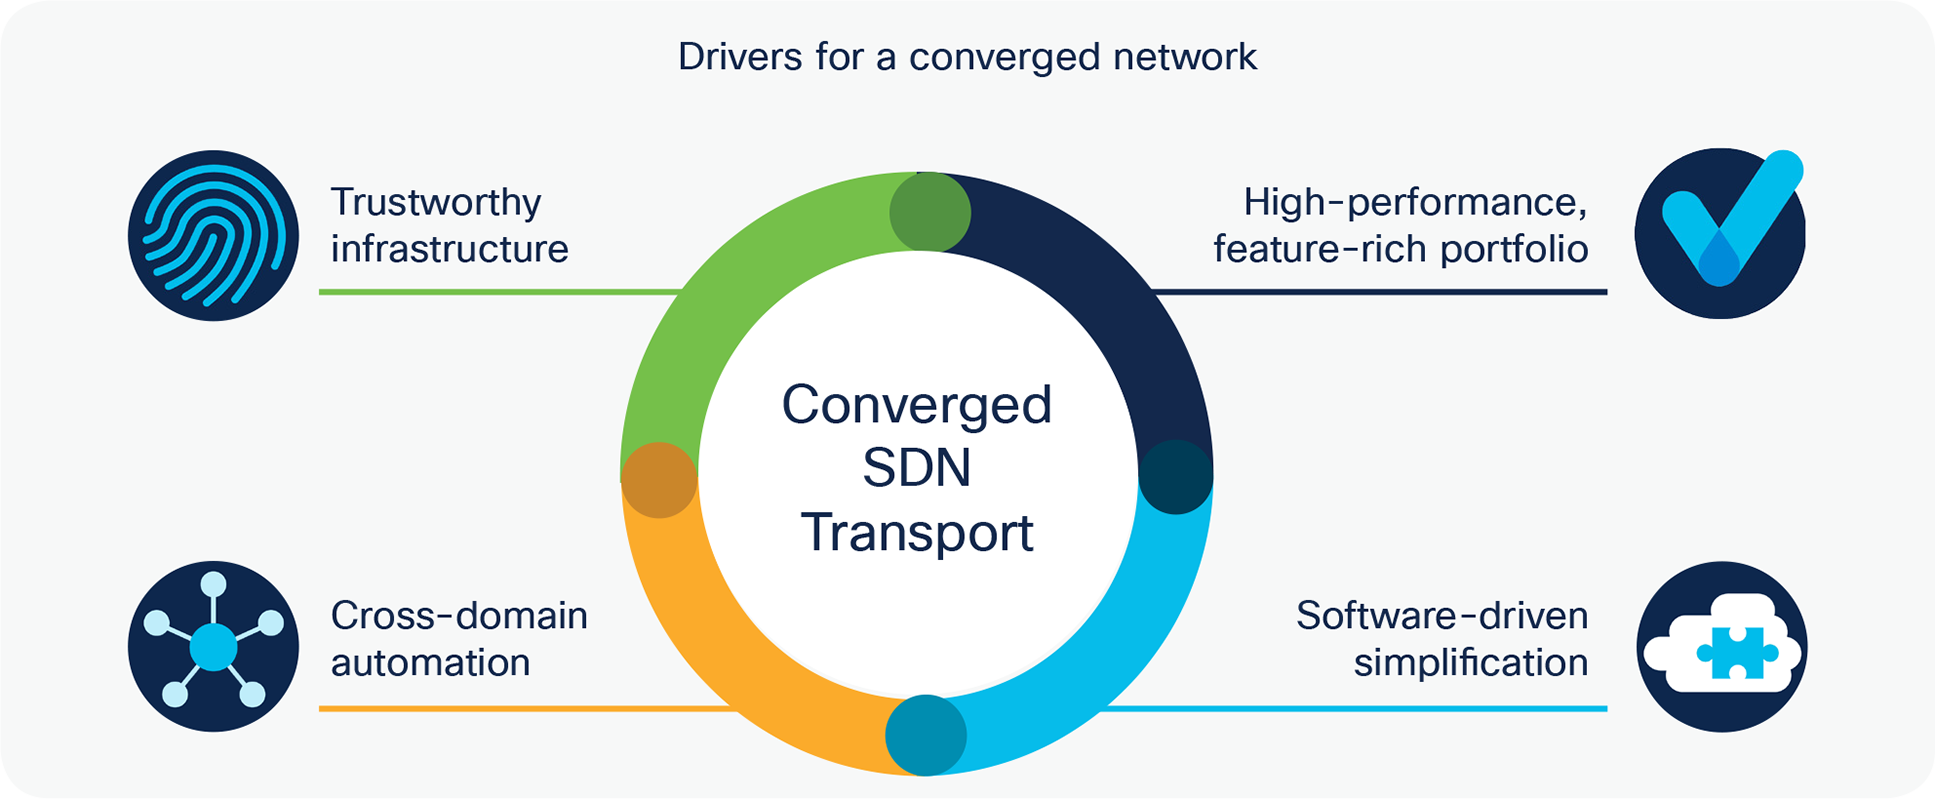 Drivers for a converged network